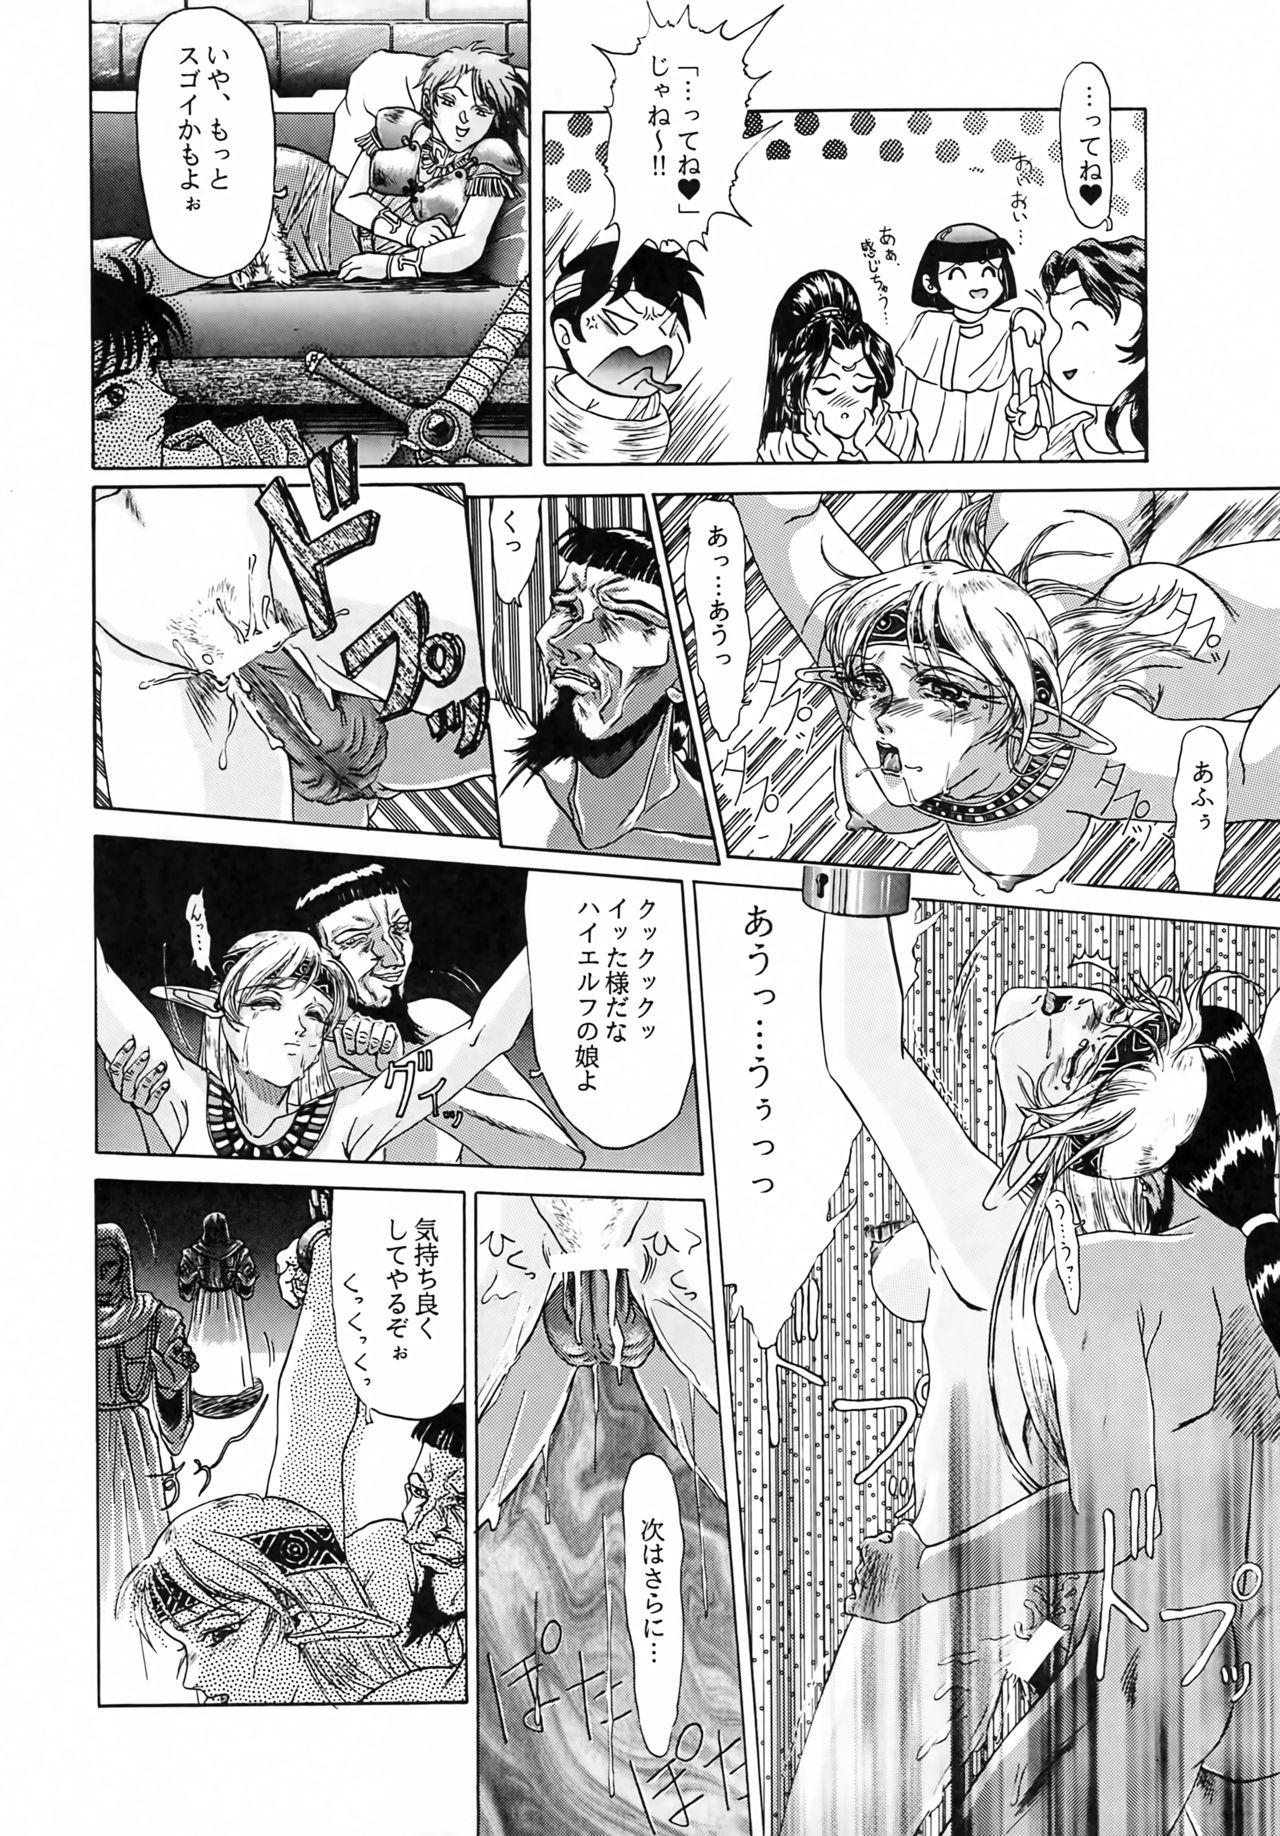 Caliente Karla Zouho Kaiteiban - Record of lodoss war Rico - Page 11